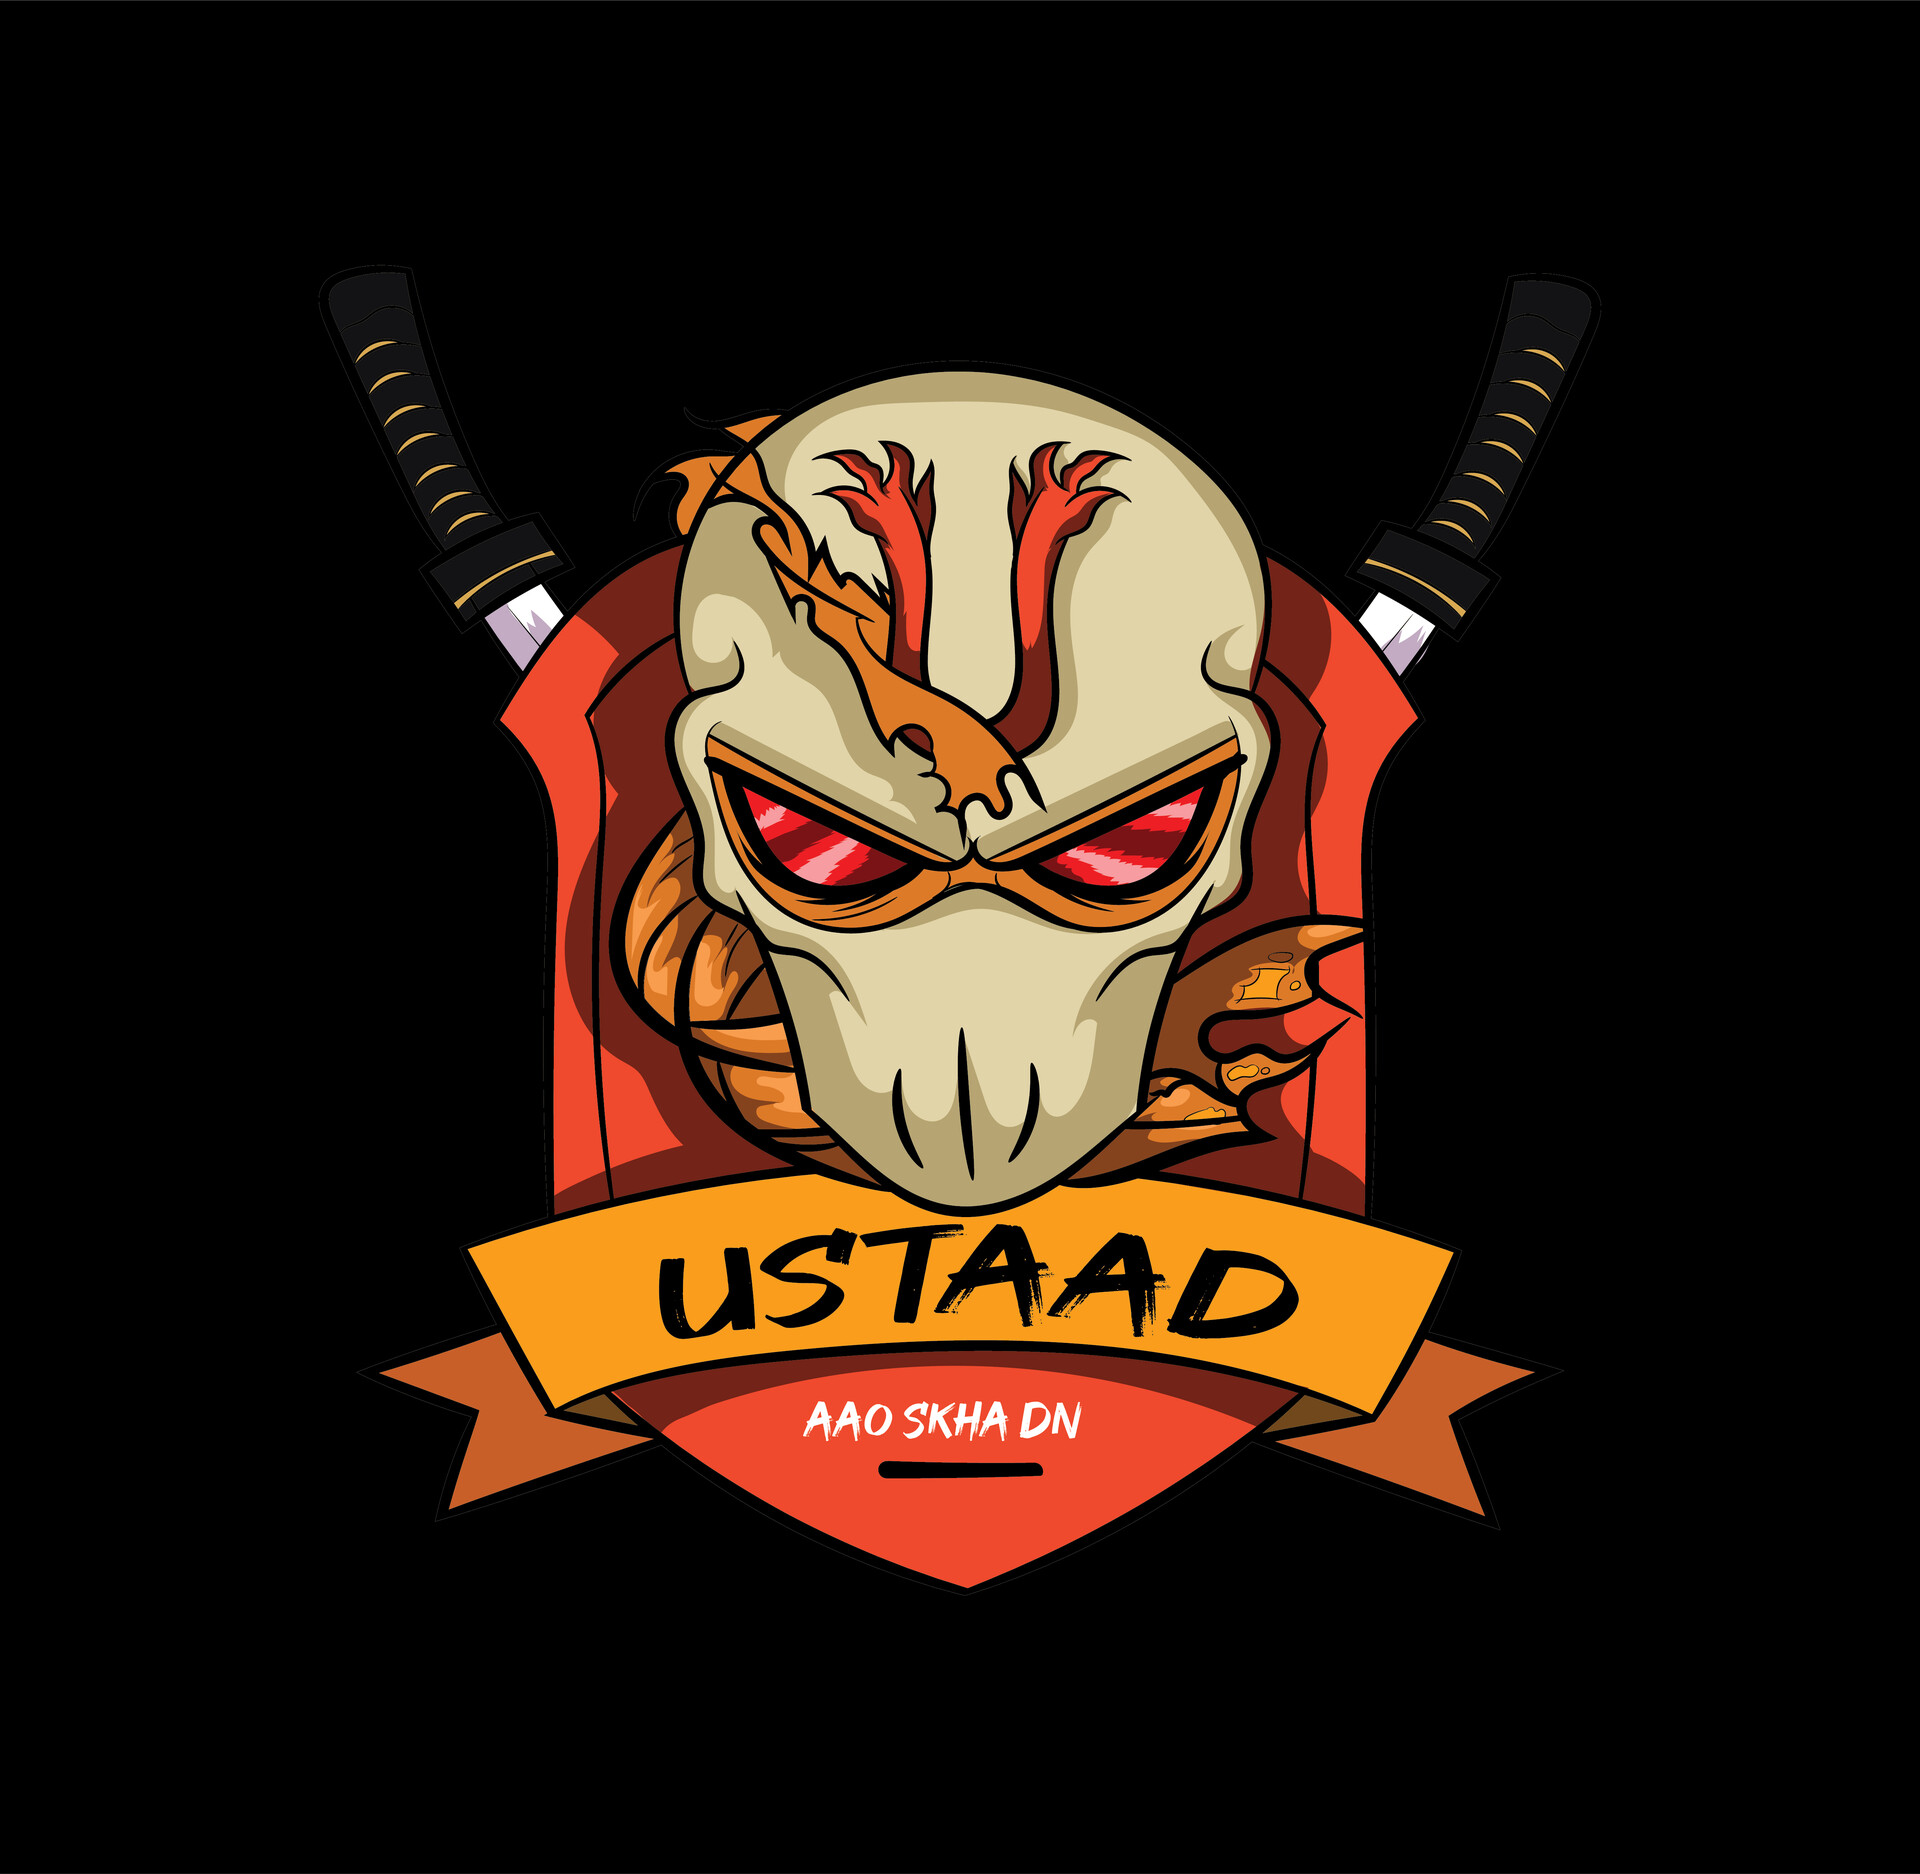 Ustaad 007 Logo For Gaming Youtube Channel